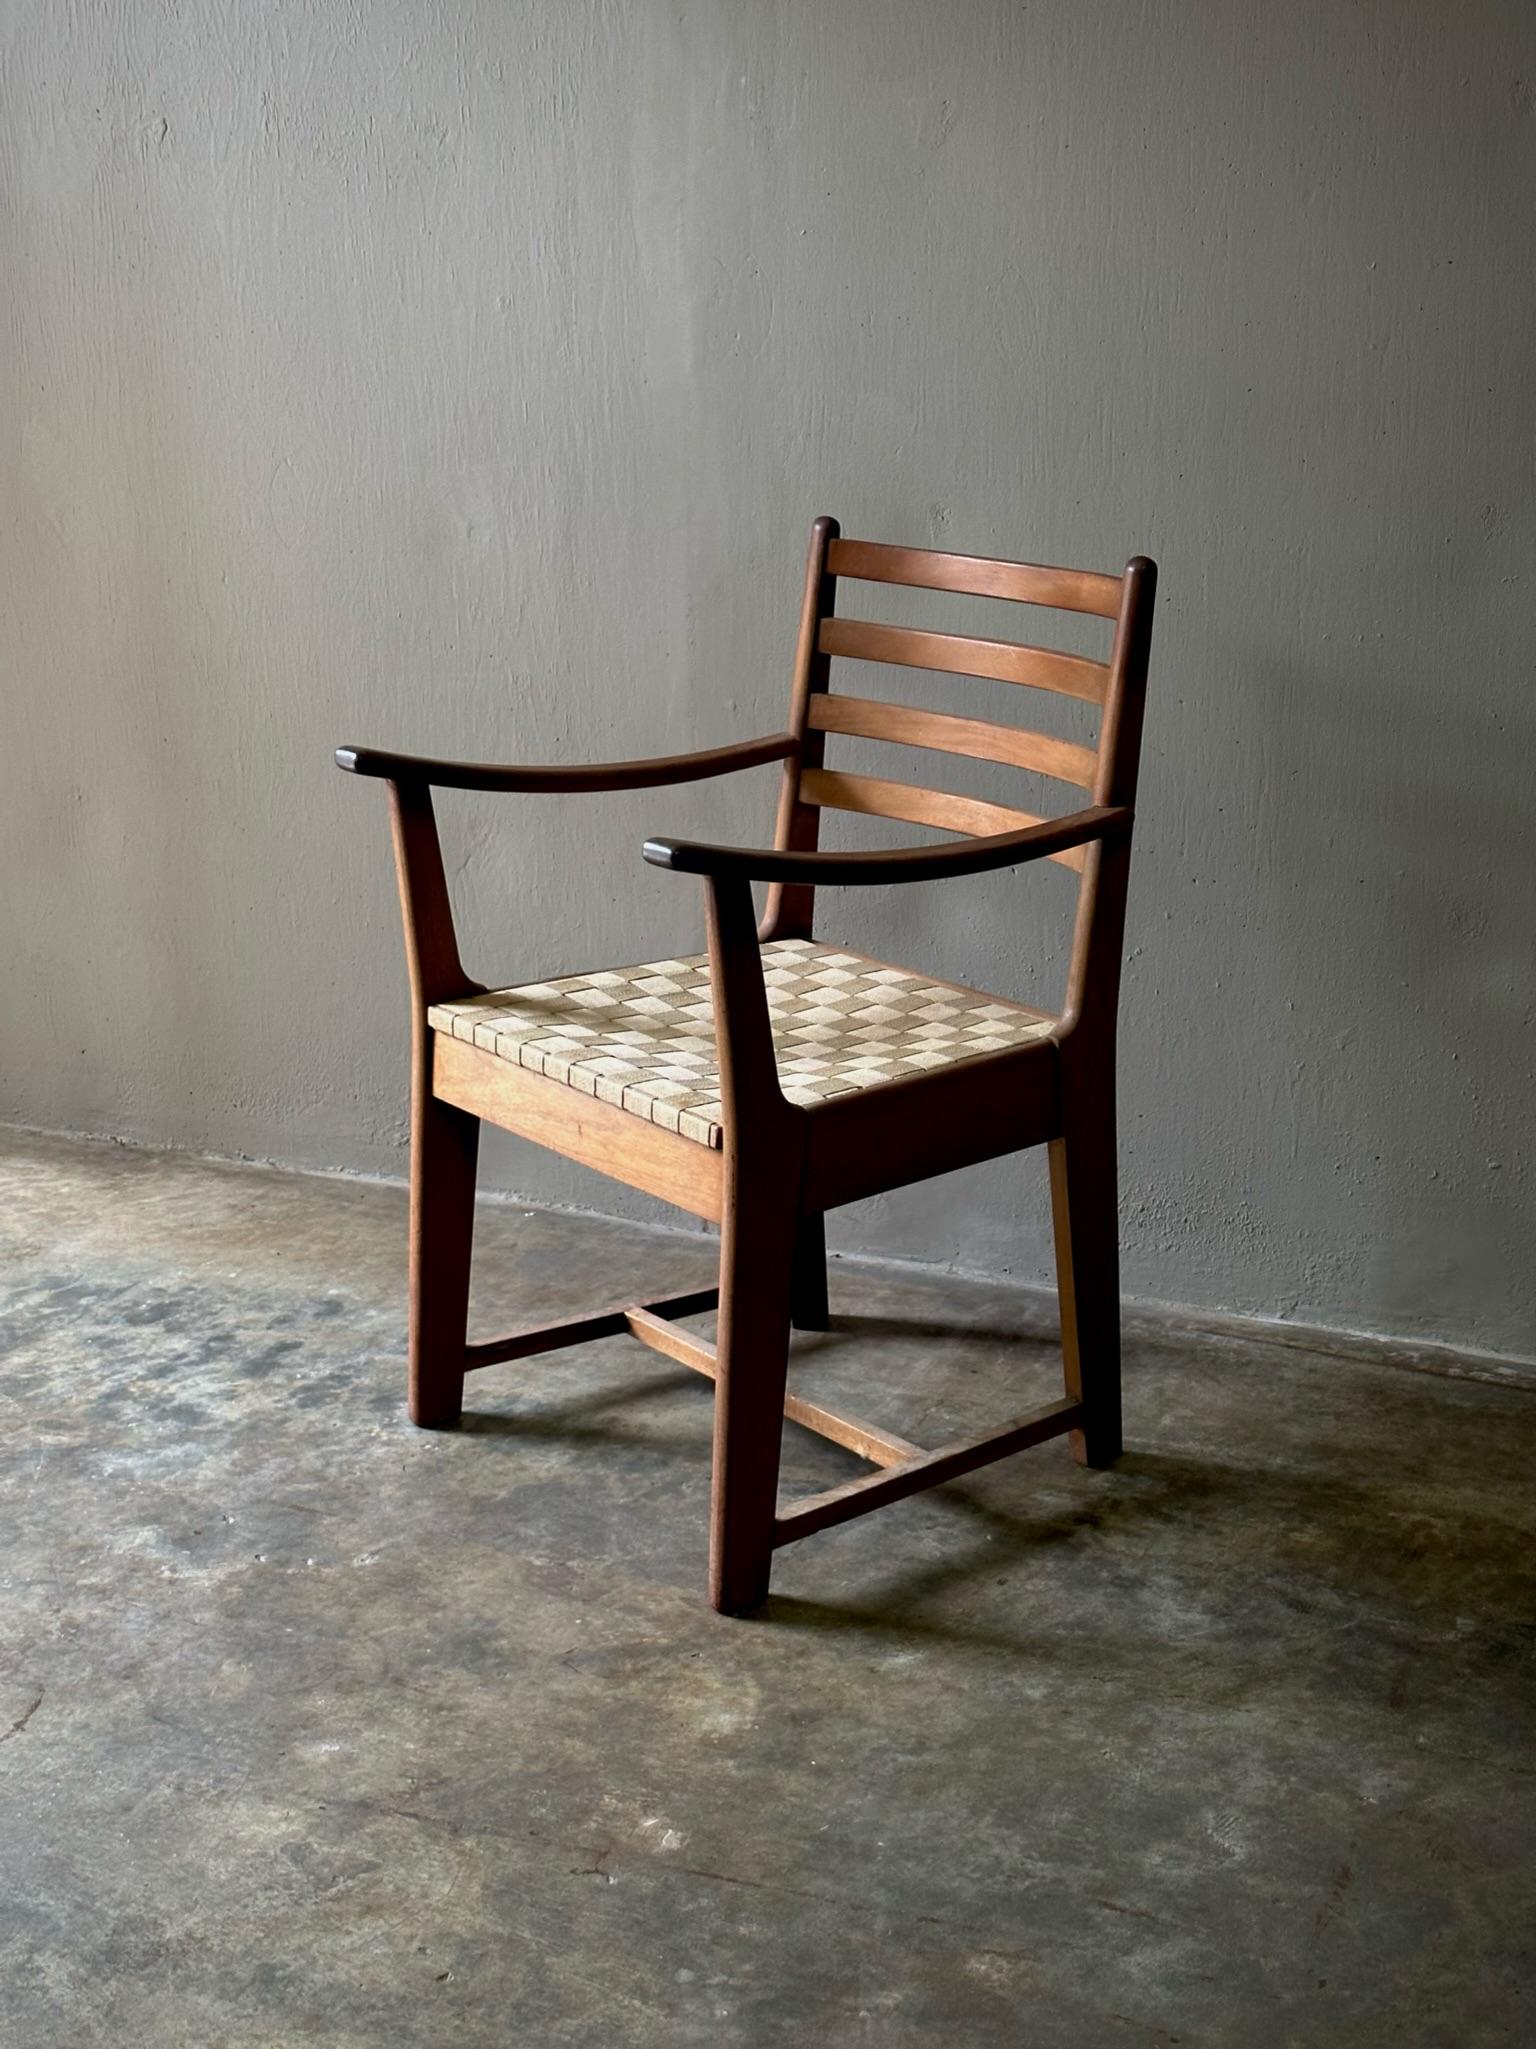 Rare Bas Van Pelt armchair with solid teak framework and beige fabric strap seat cushion. An exceptional work of high Dutch modernism with a relaxed, earthy feel and refined, modern sensibility.

Netherlands, circa 1930

Dimensions: 22.8W x 24.8D x